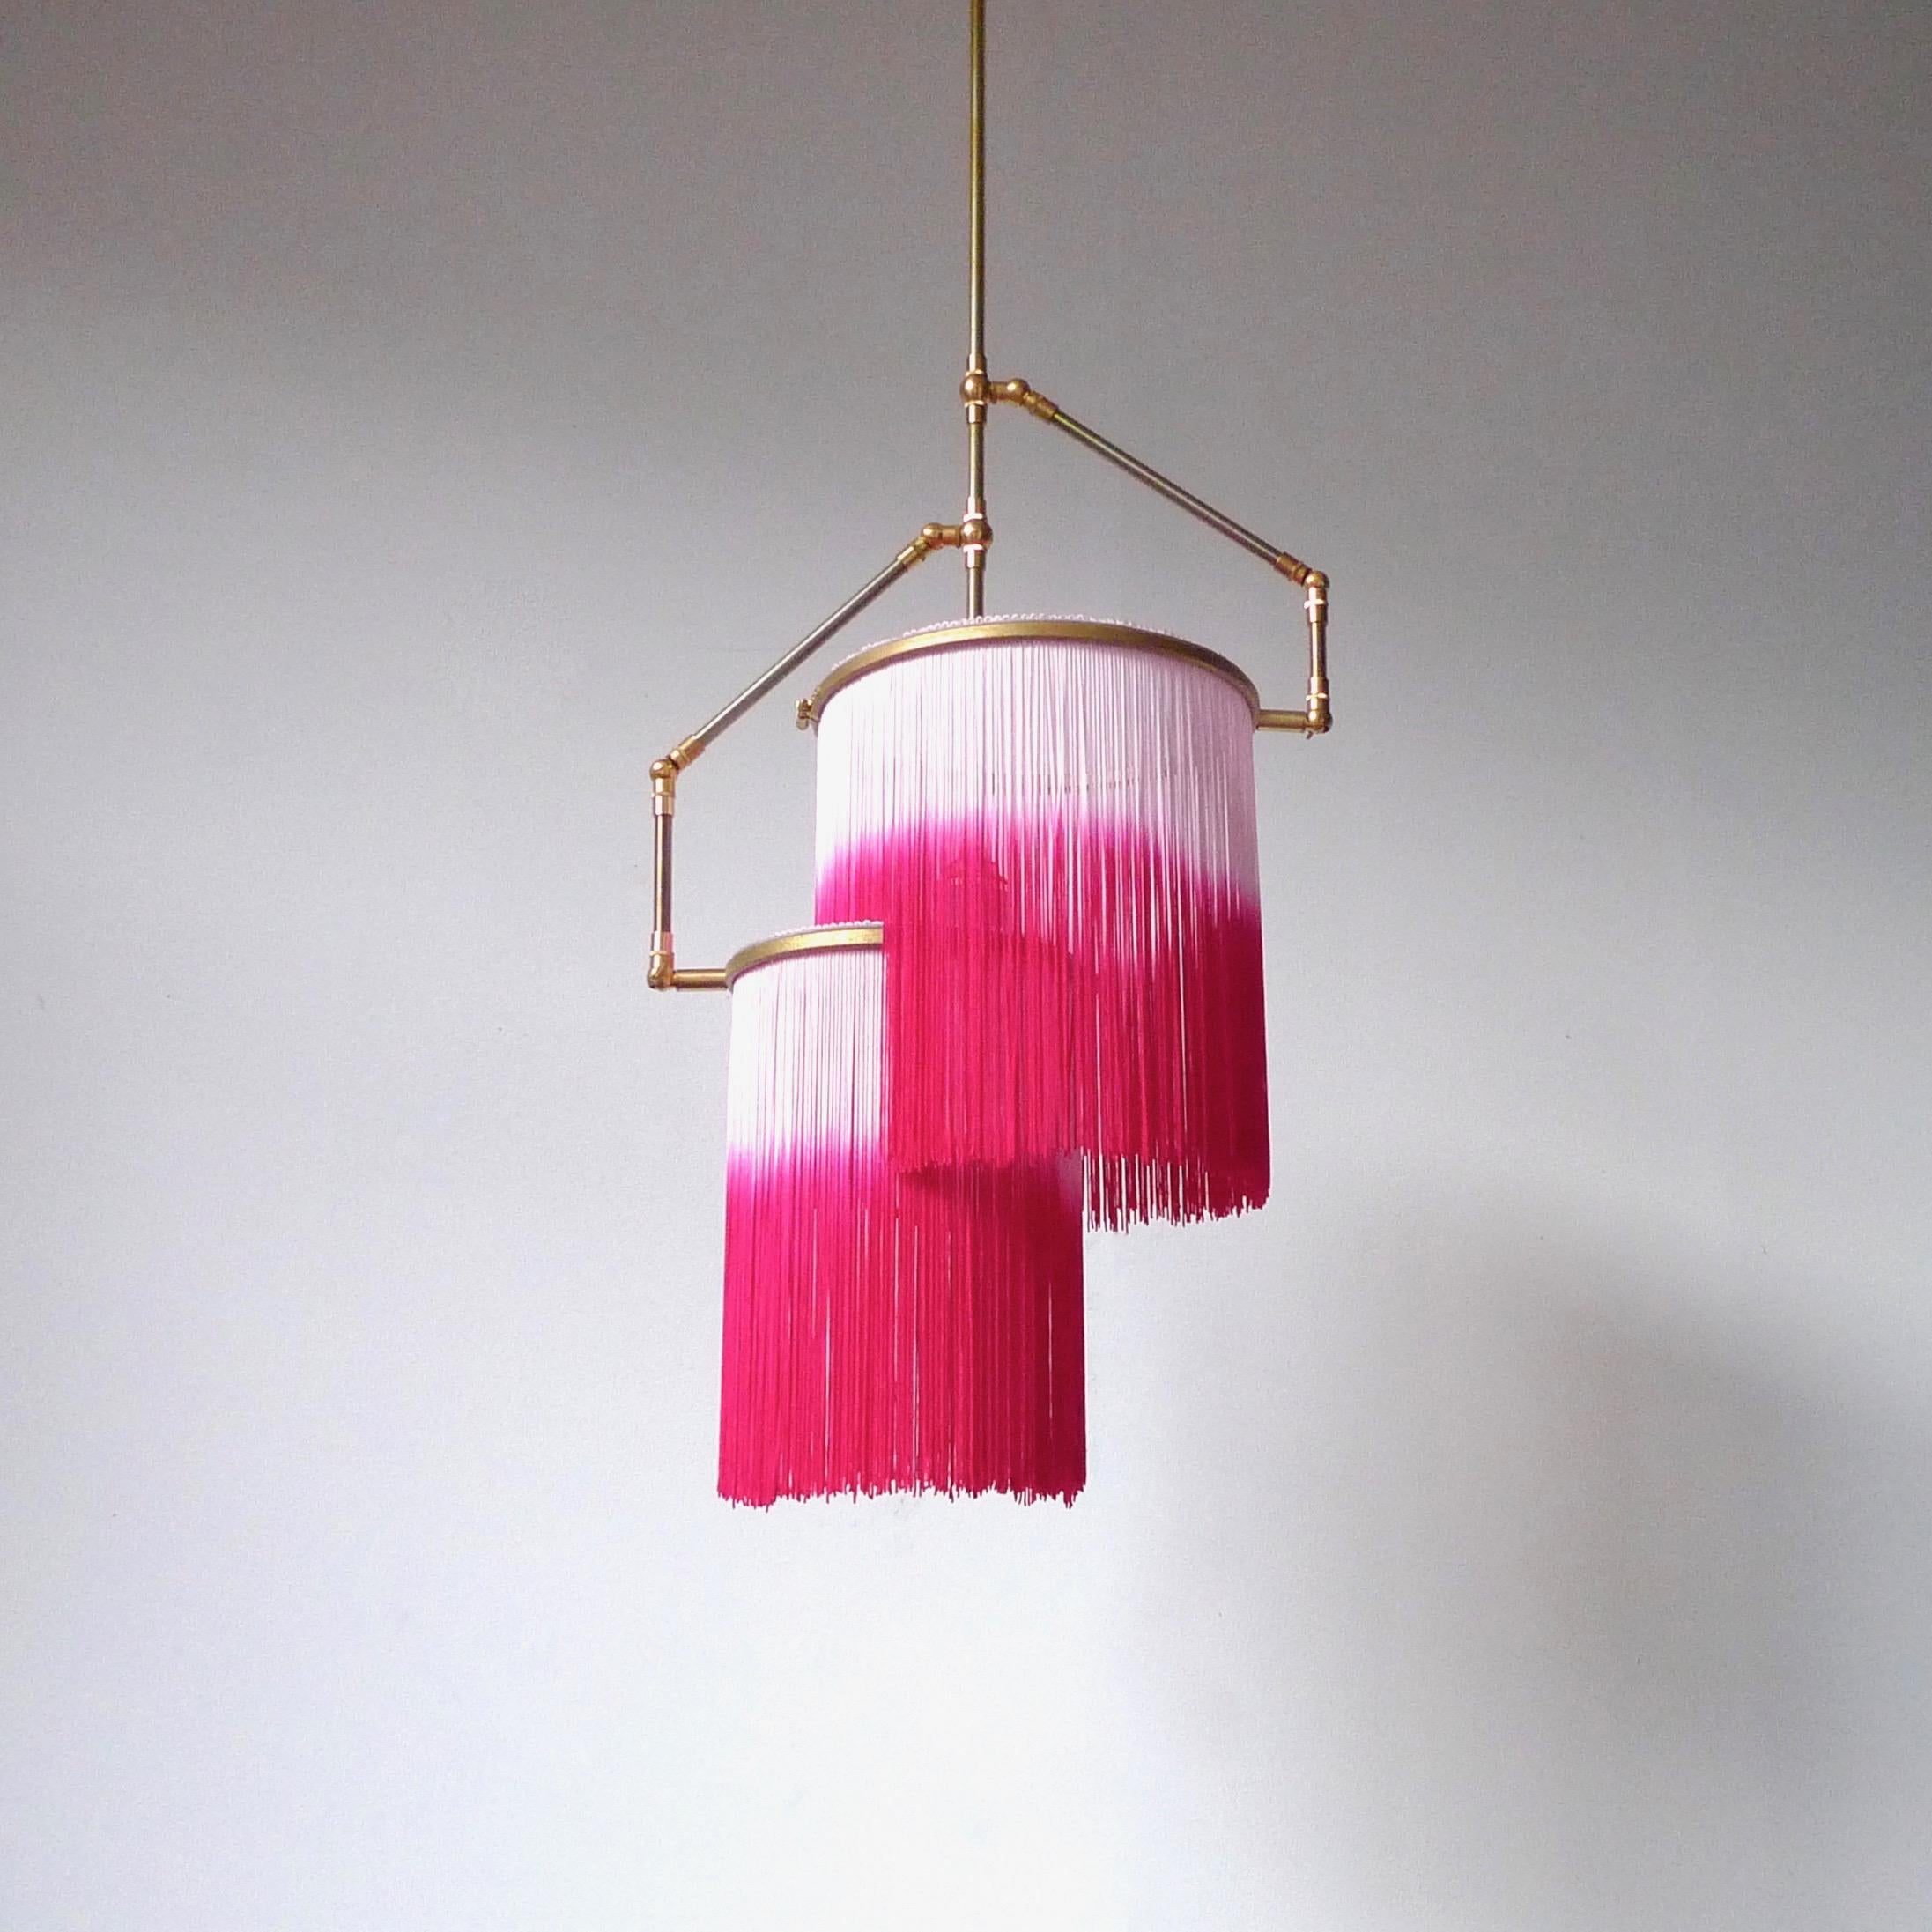 Pink Charme pendant lamp, Sander Bottinga

Dimensions: H 45 (can be customized) x W 38 x D 25 cm
Hand-sculpted in brass, leather, wood and dip dyed colored fringes in viscose.
The movable arms makes it possible to move the circles with fringes